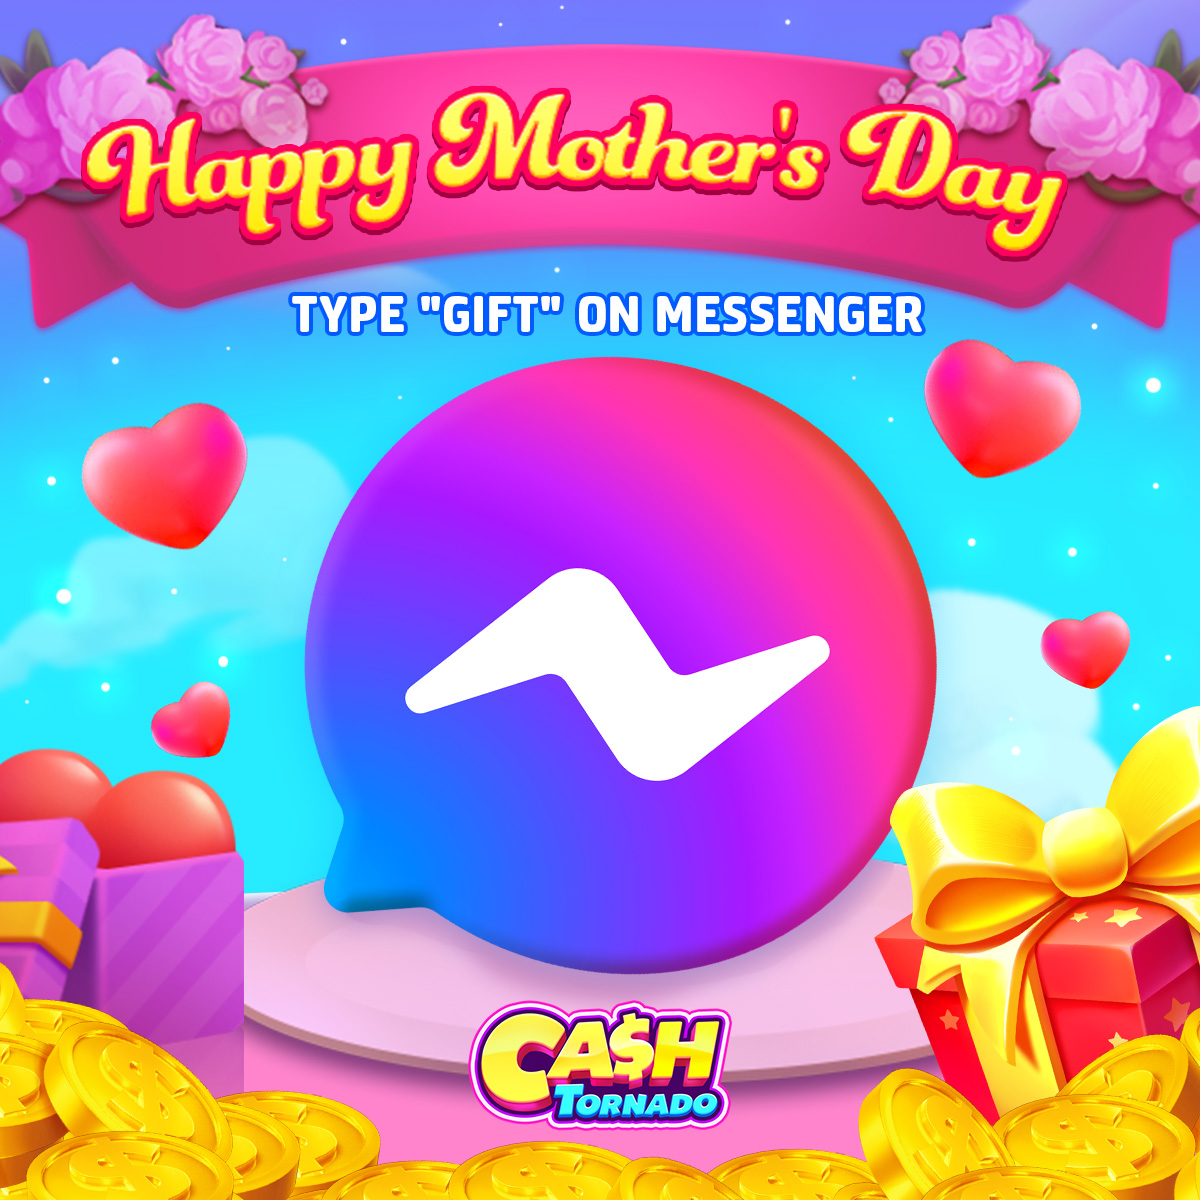 #FREECOIN: zeroo.io/qzuhcvsj 🌸
 Happy Mother’s Day! 
Let's celebrate this special day together with a surprise gift from CTS FB Messenger!  
GIFT CODE for x followers：MHMD6